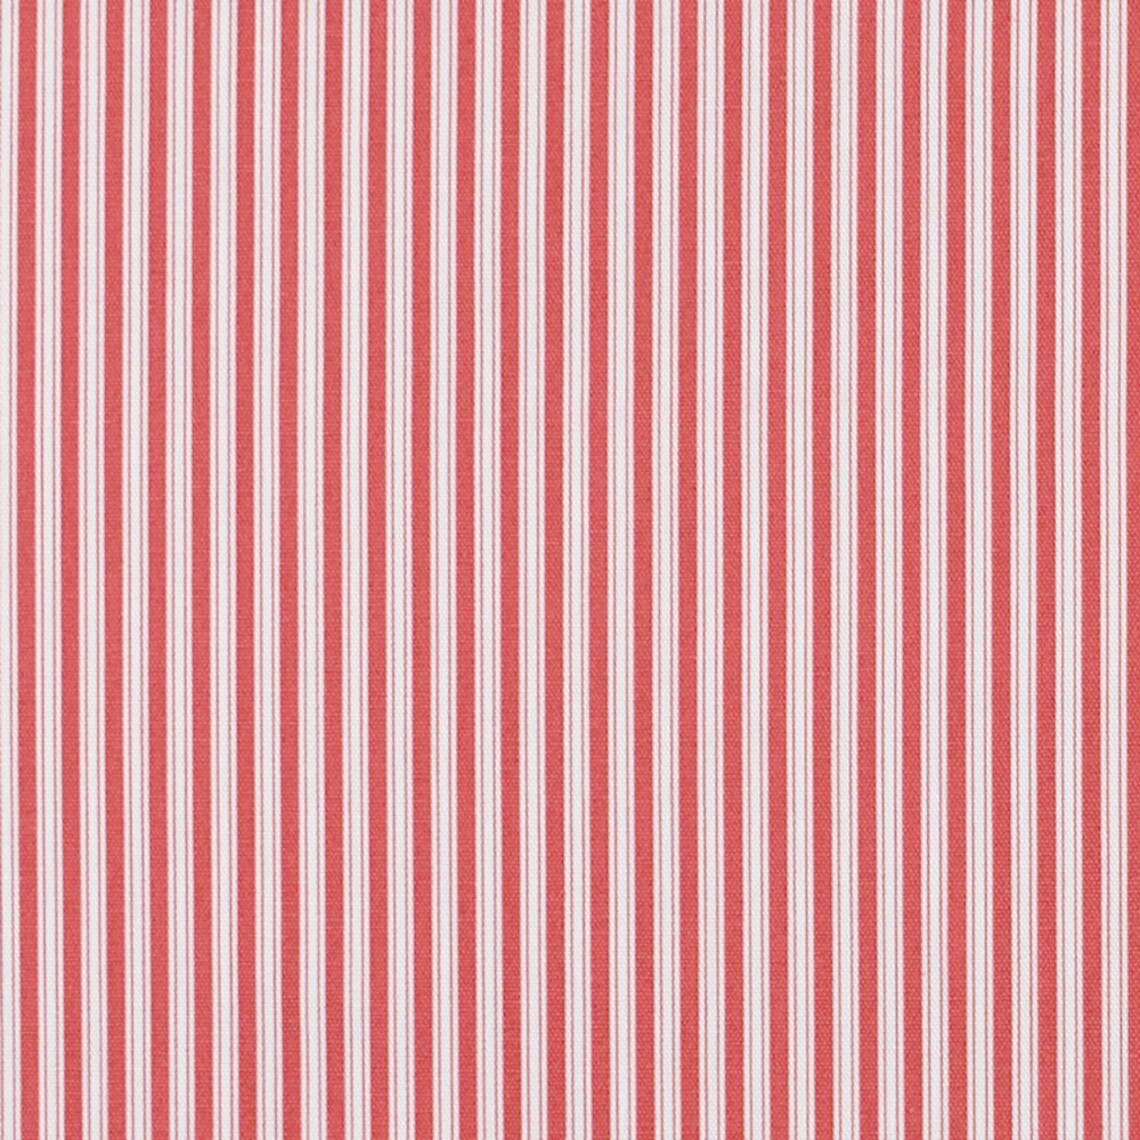 Tailored Bedskirt in Polo Calypso Rose Red Stripe on Off-White